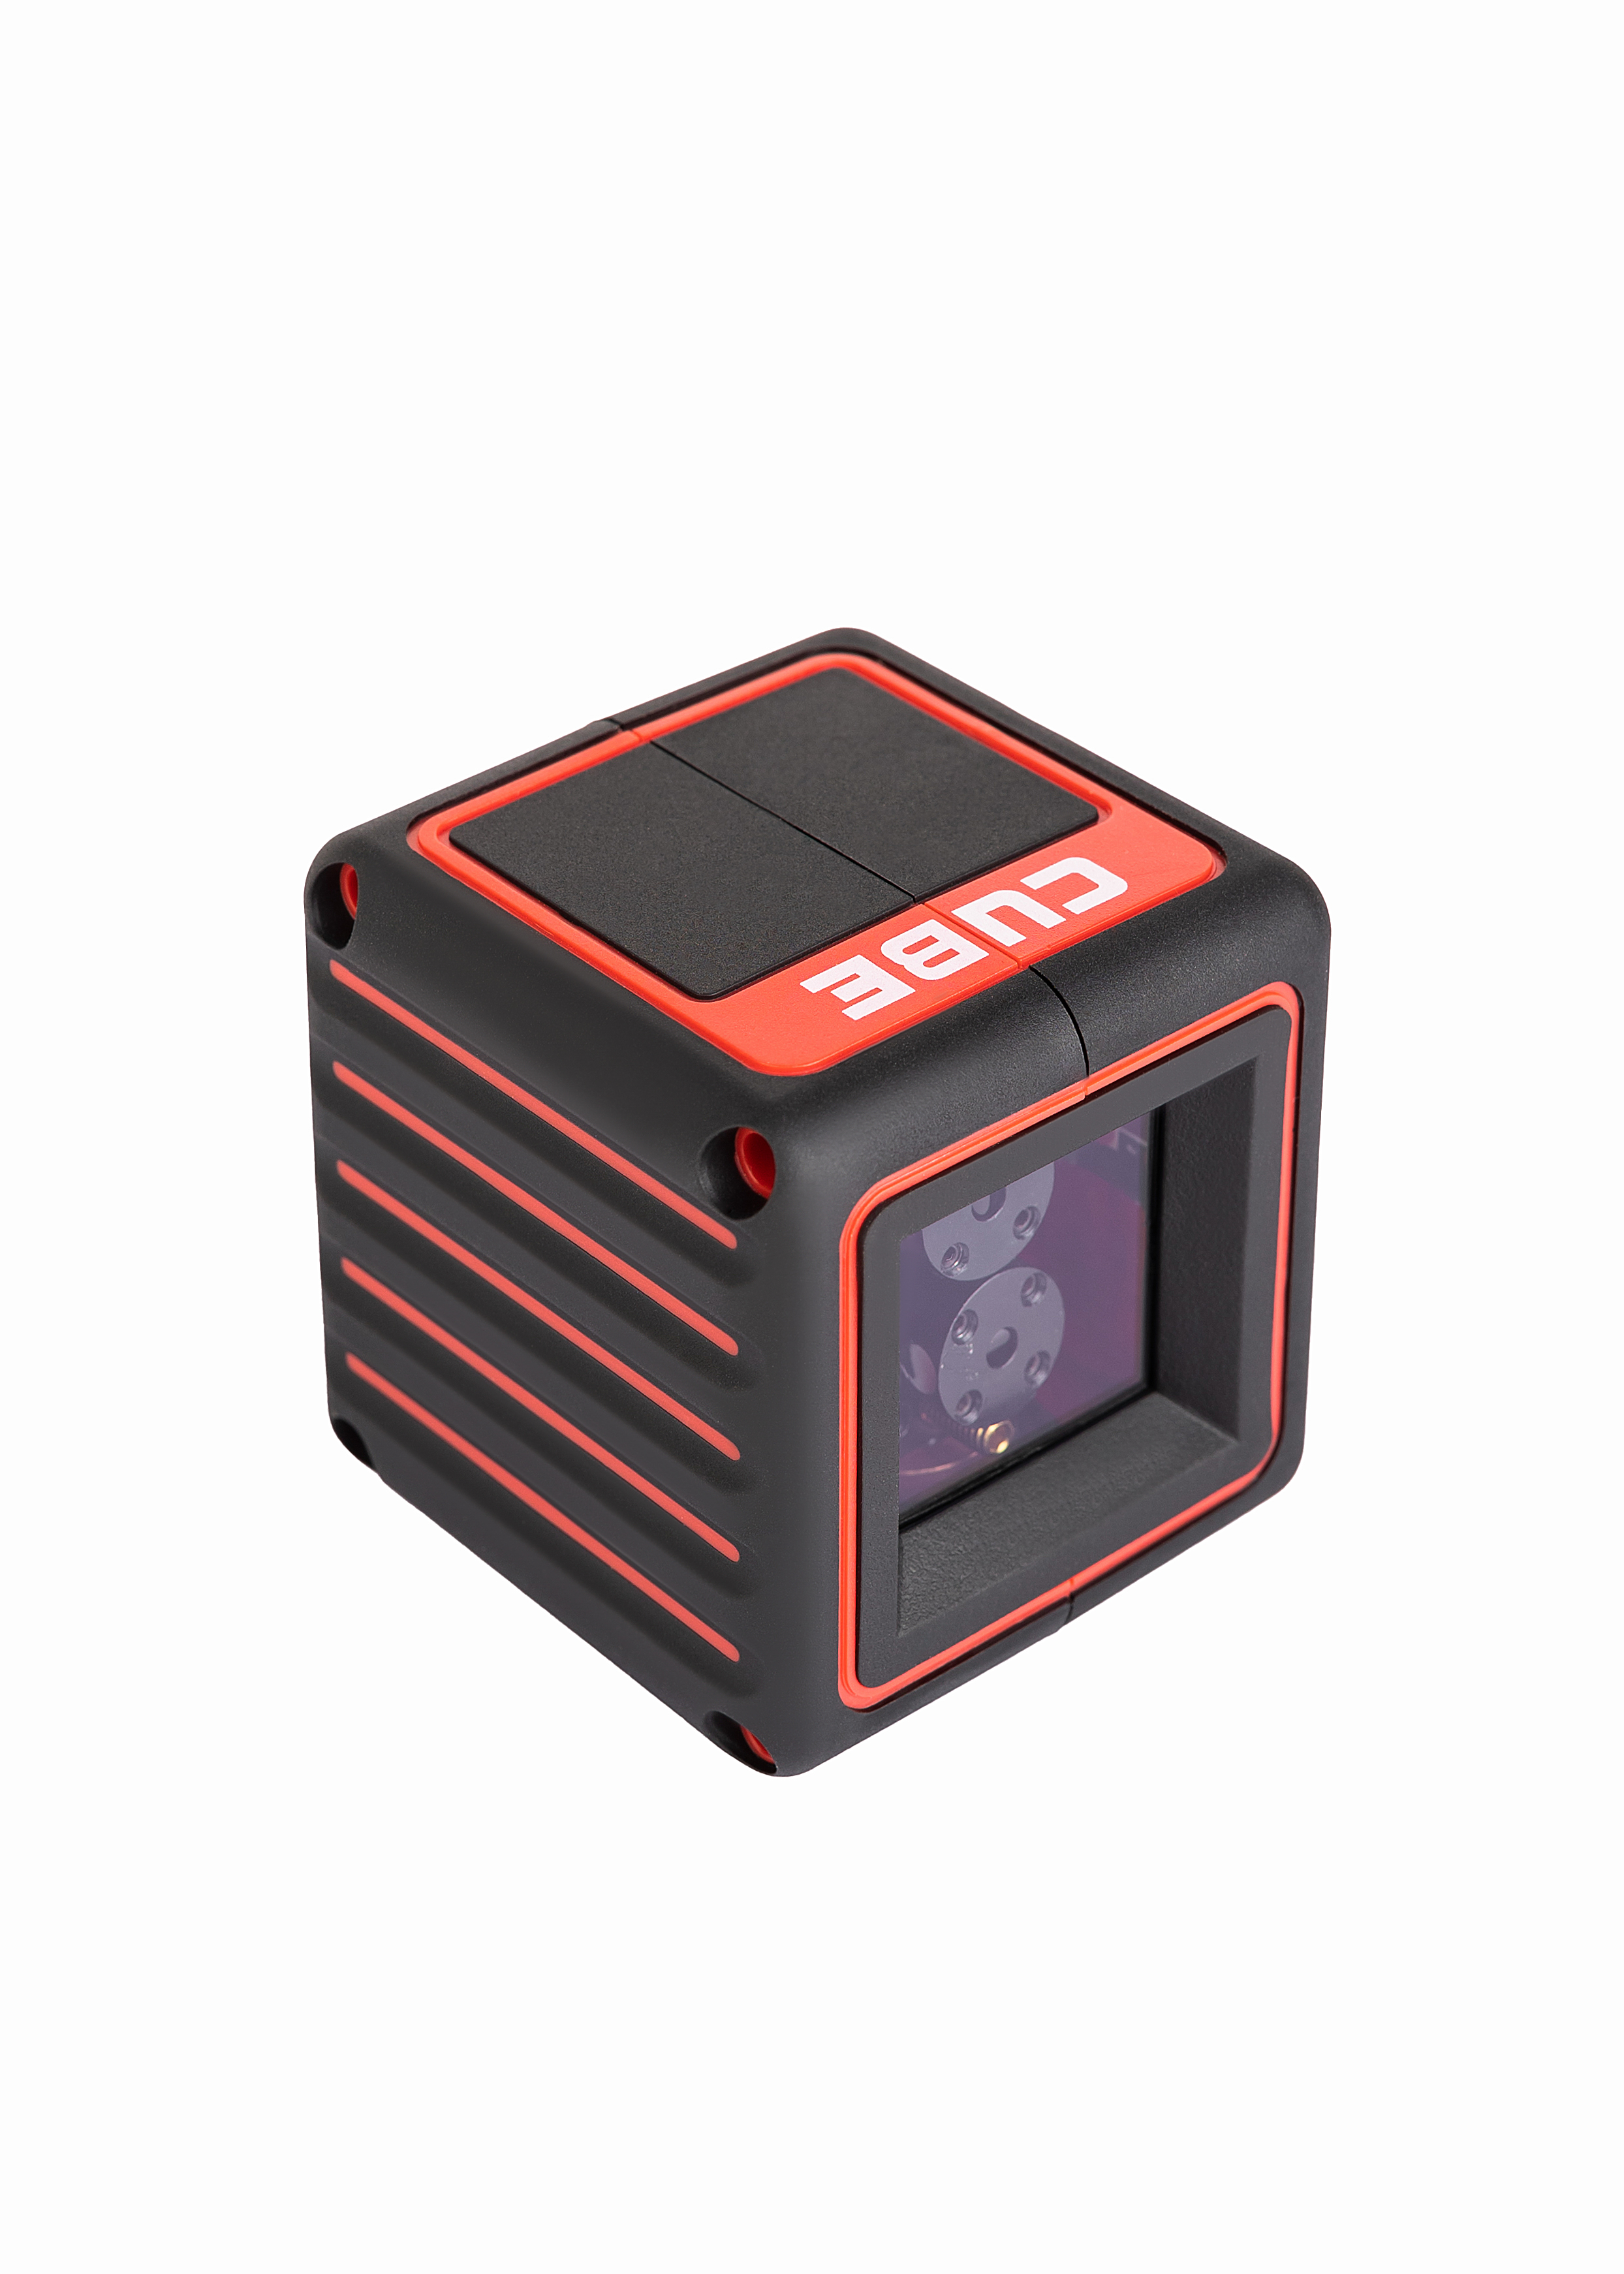 Cube ultimate edition